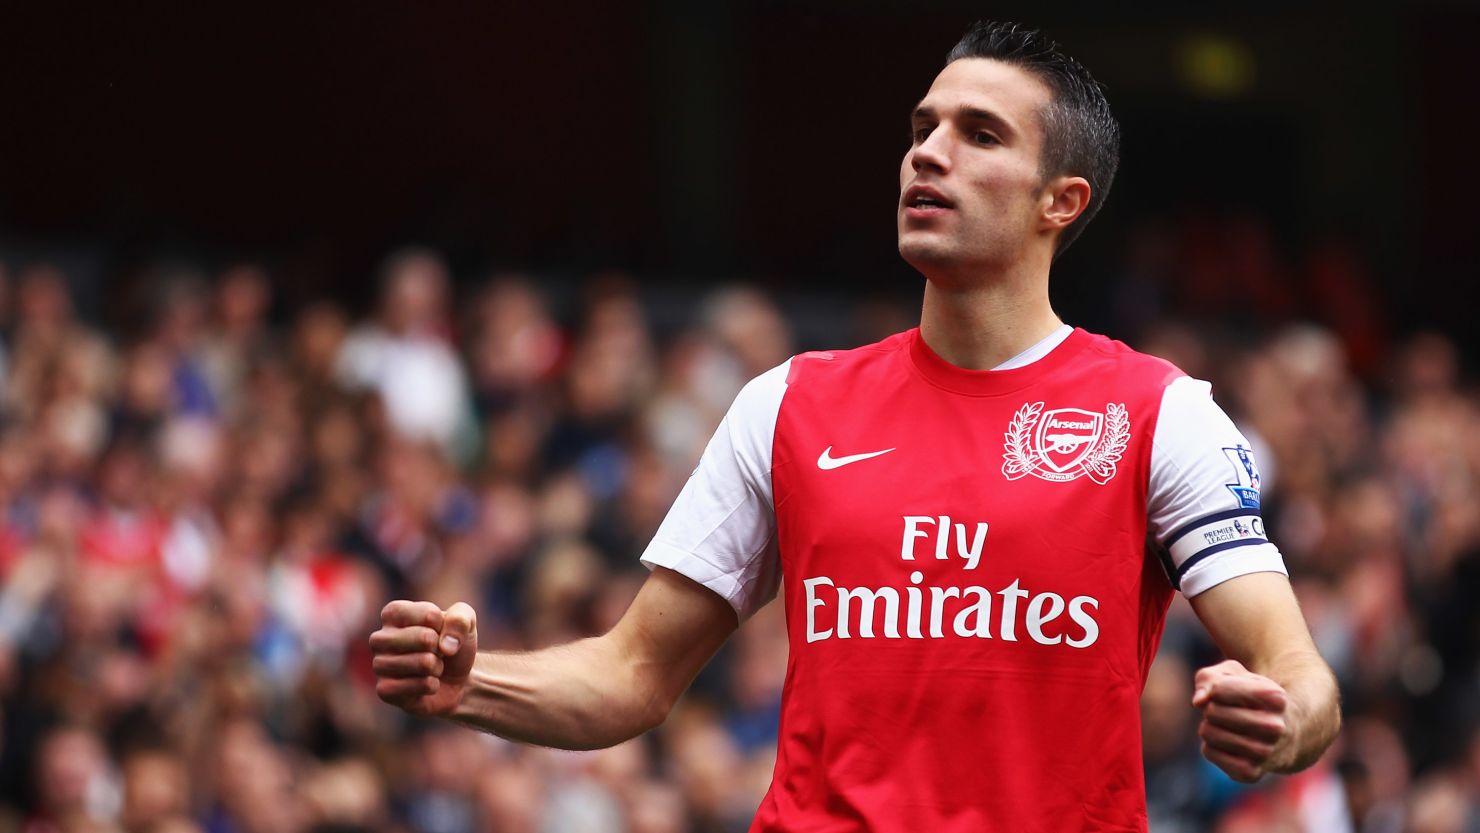 Robin Van Persie celebrates his opening goal for Arsenal at the Emirates in the 2-1 win over Sunderland.